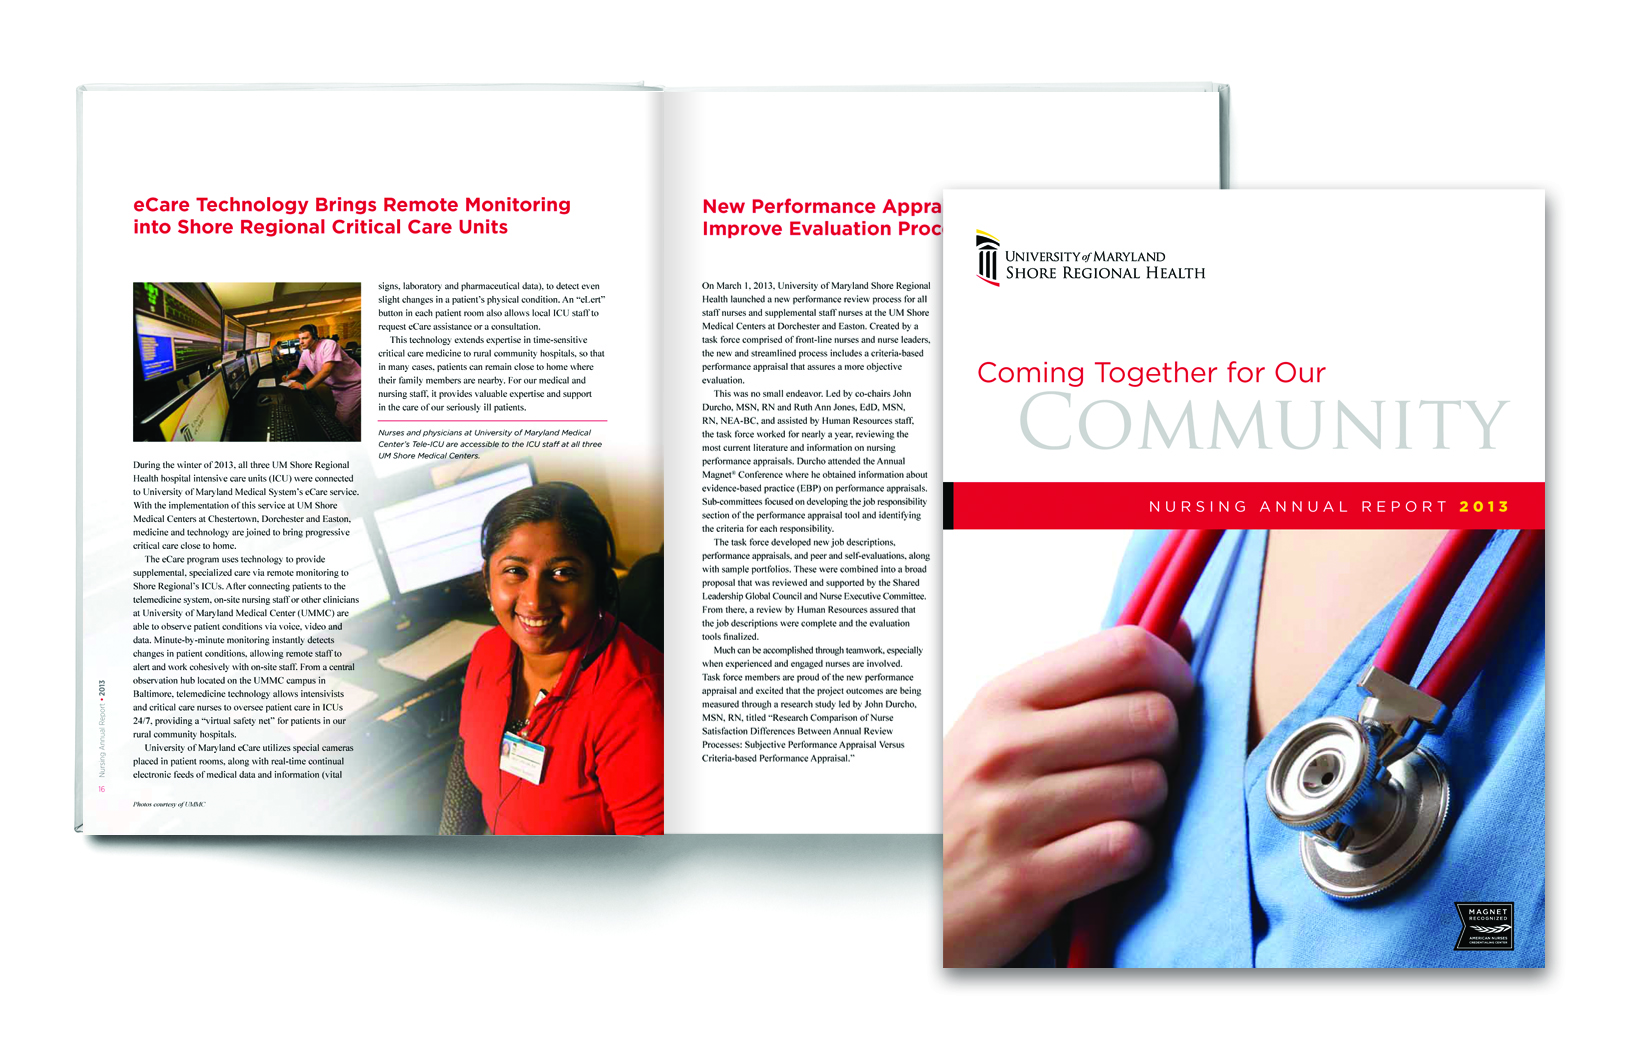 UM Shore Regional Health’s 32-page Nursing Annual Report, designed and produced by Mullin/Ashley, was a winner in the 12th annual Service Industrial Advertising Awards competition.